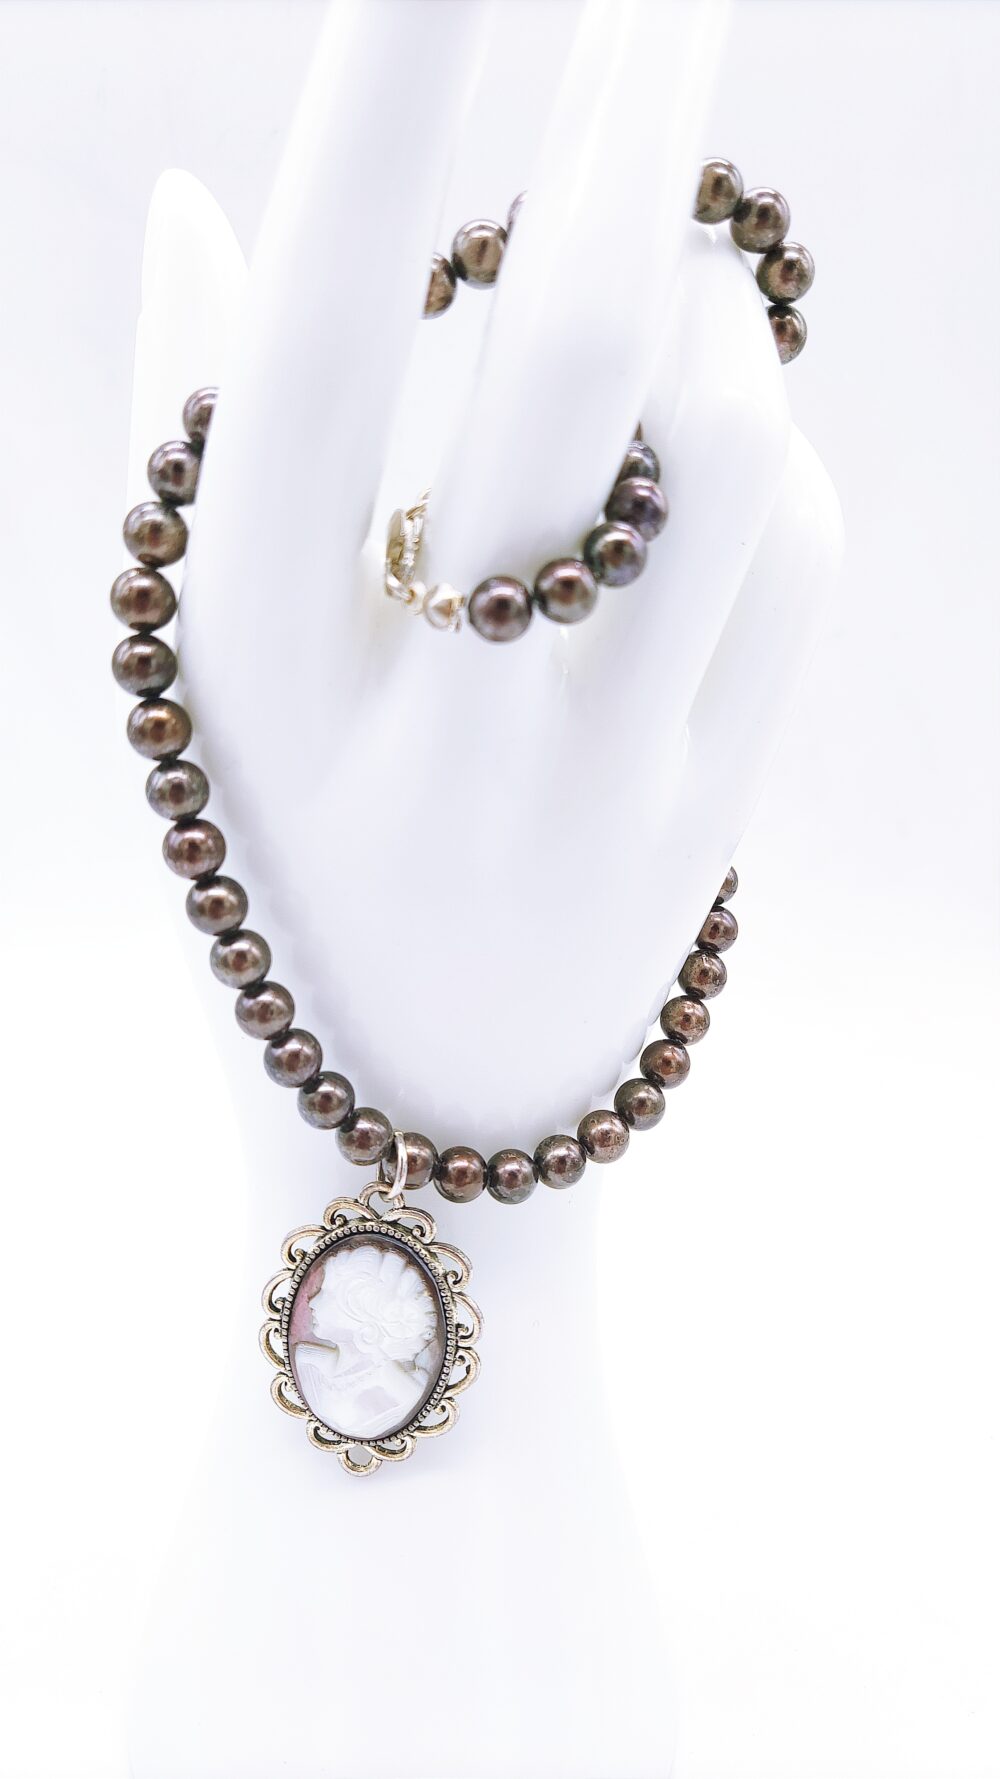 Necklace brown pearls and cameo pendant vintage style 1